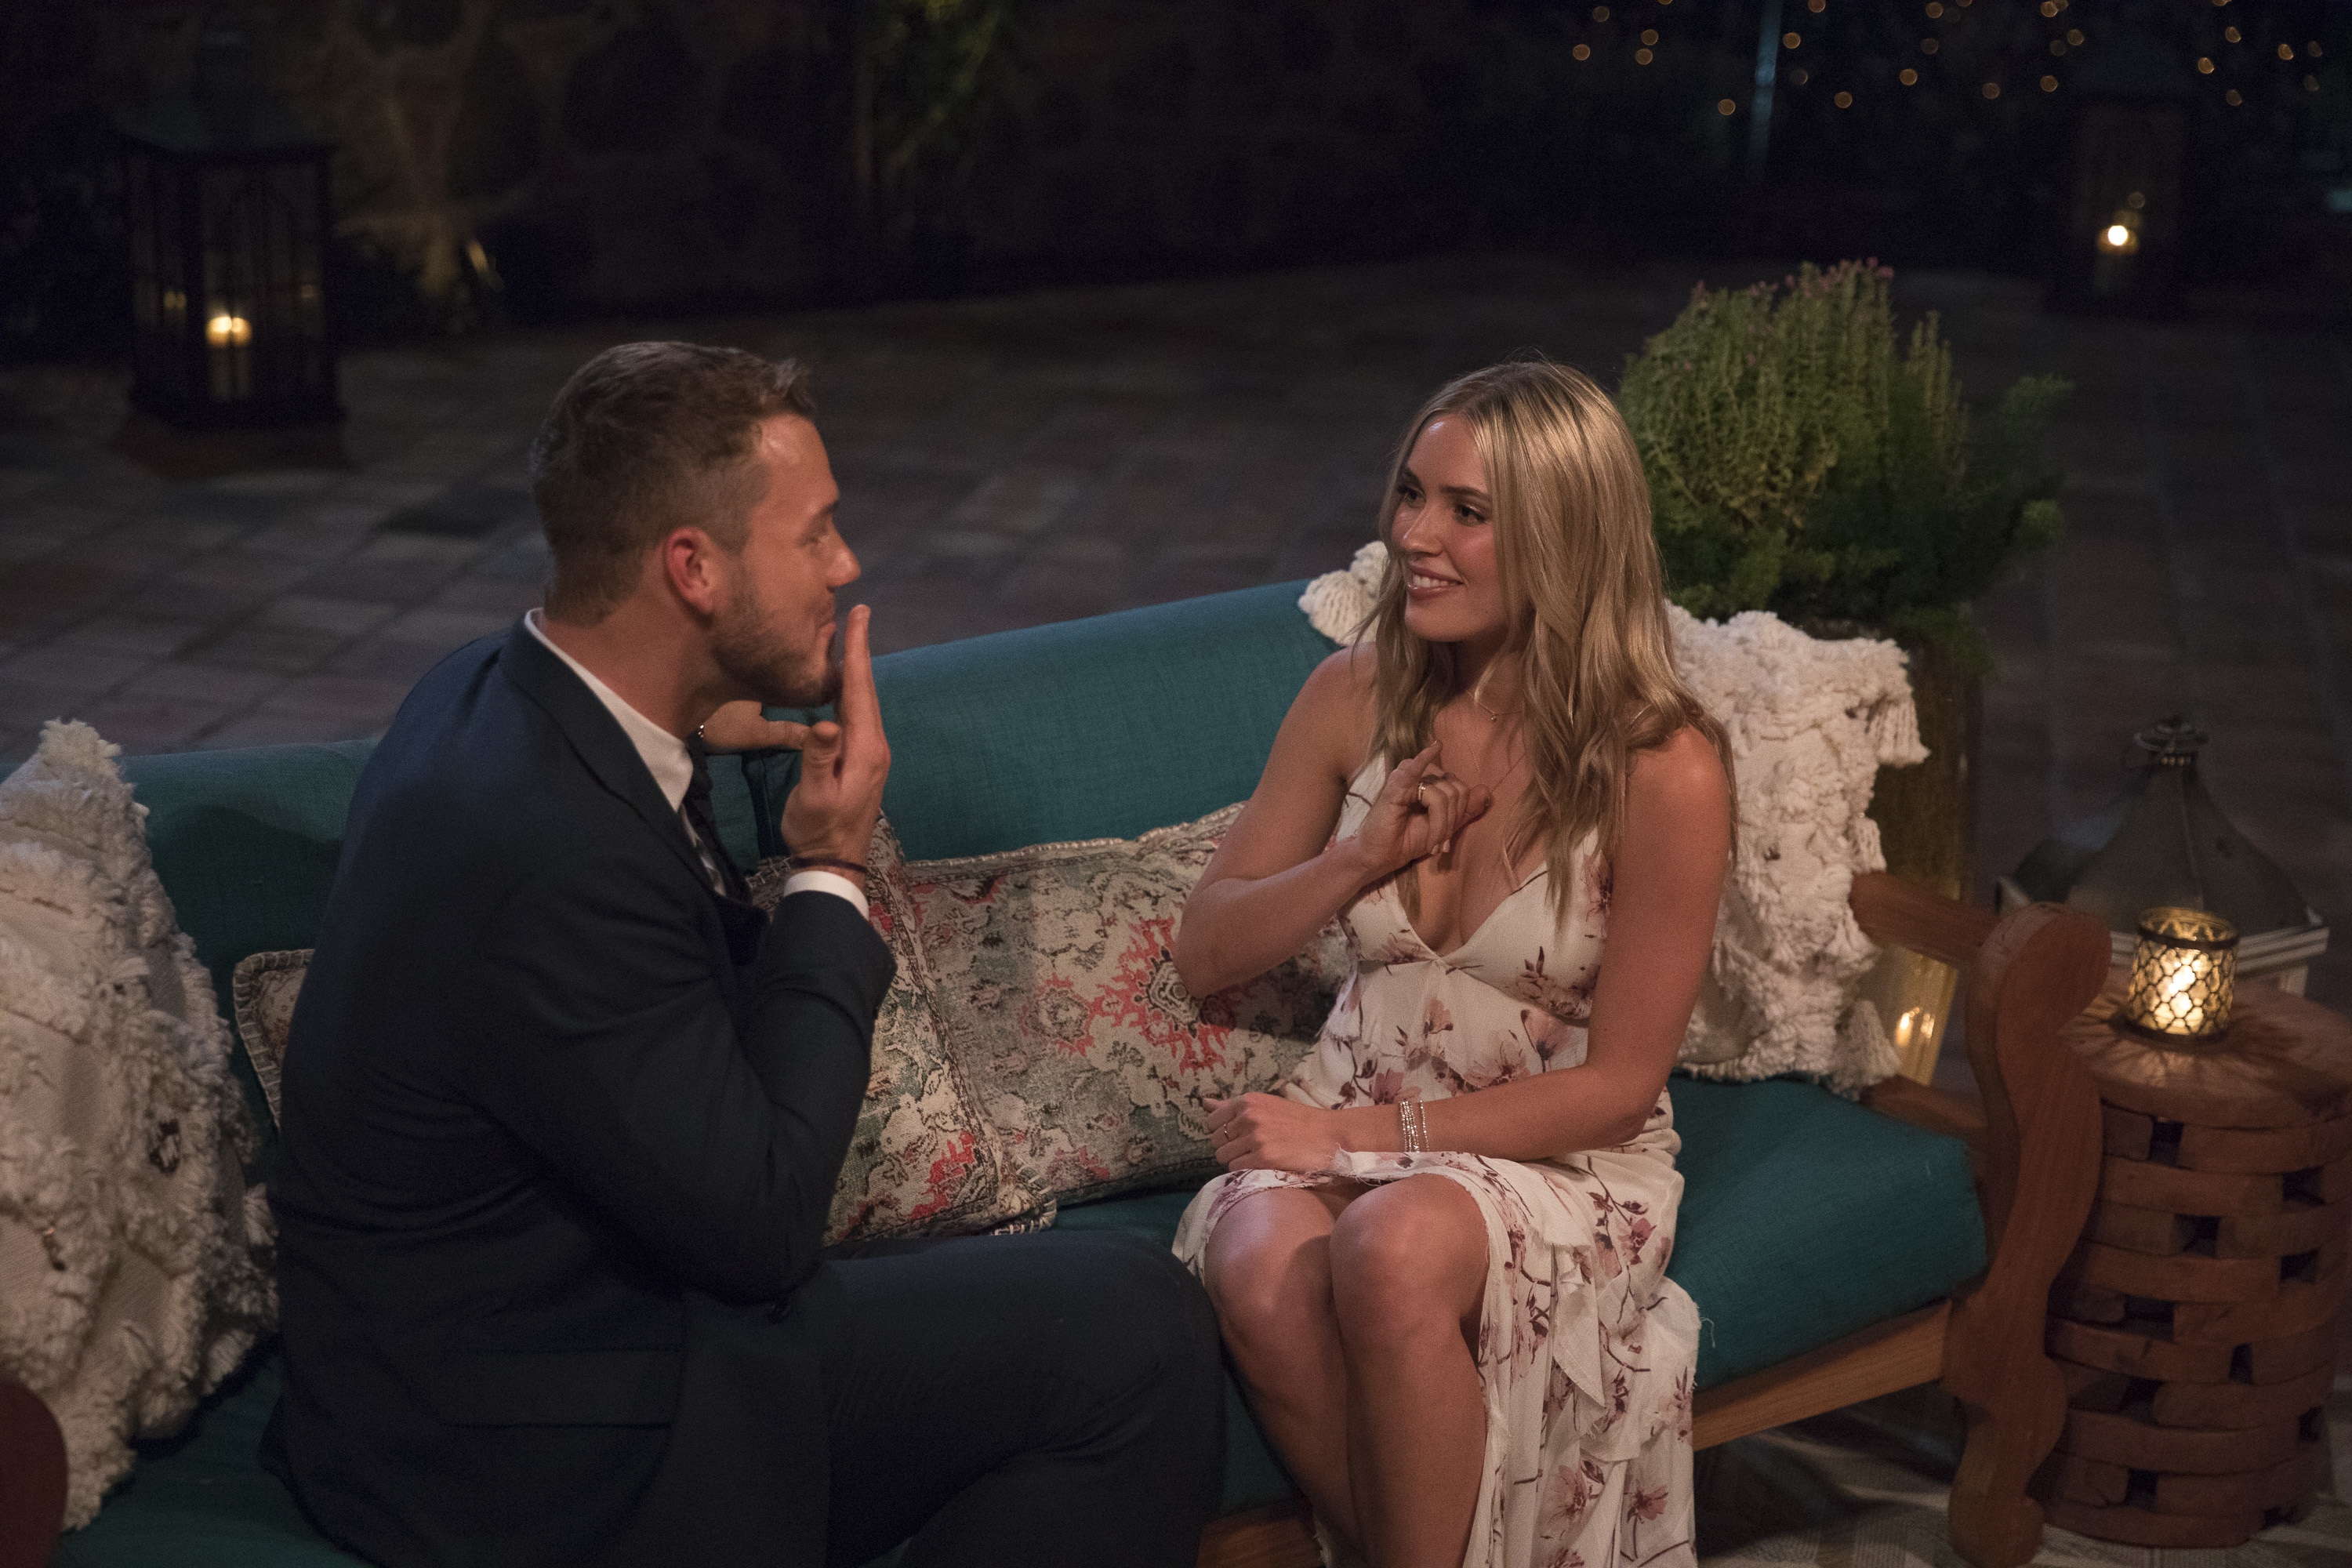 The Bachelor Winner 2019 Who Does Colton Underwood Pick?